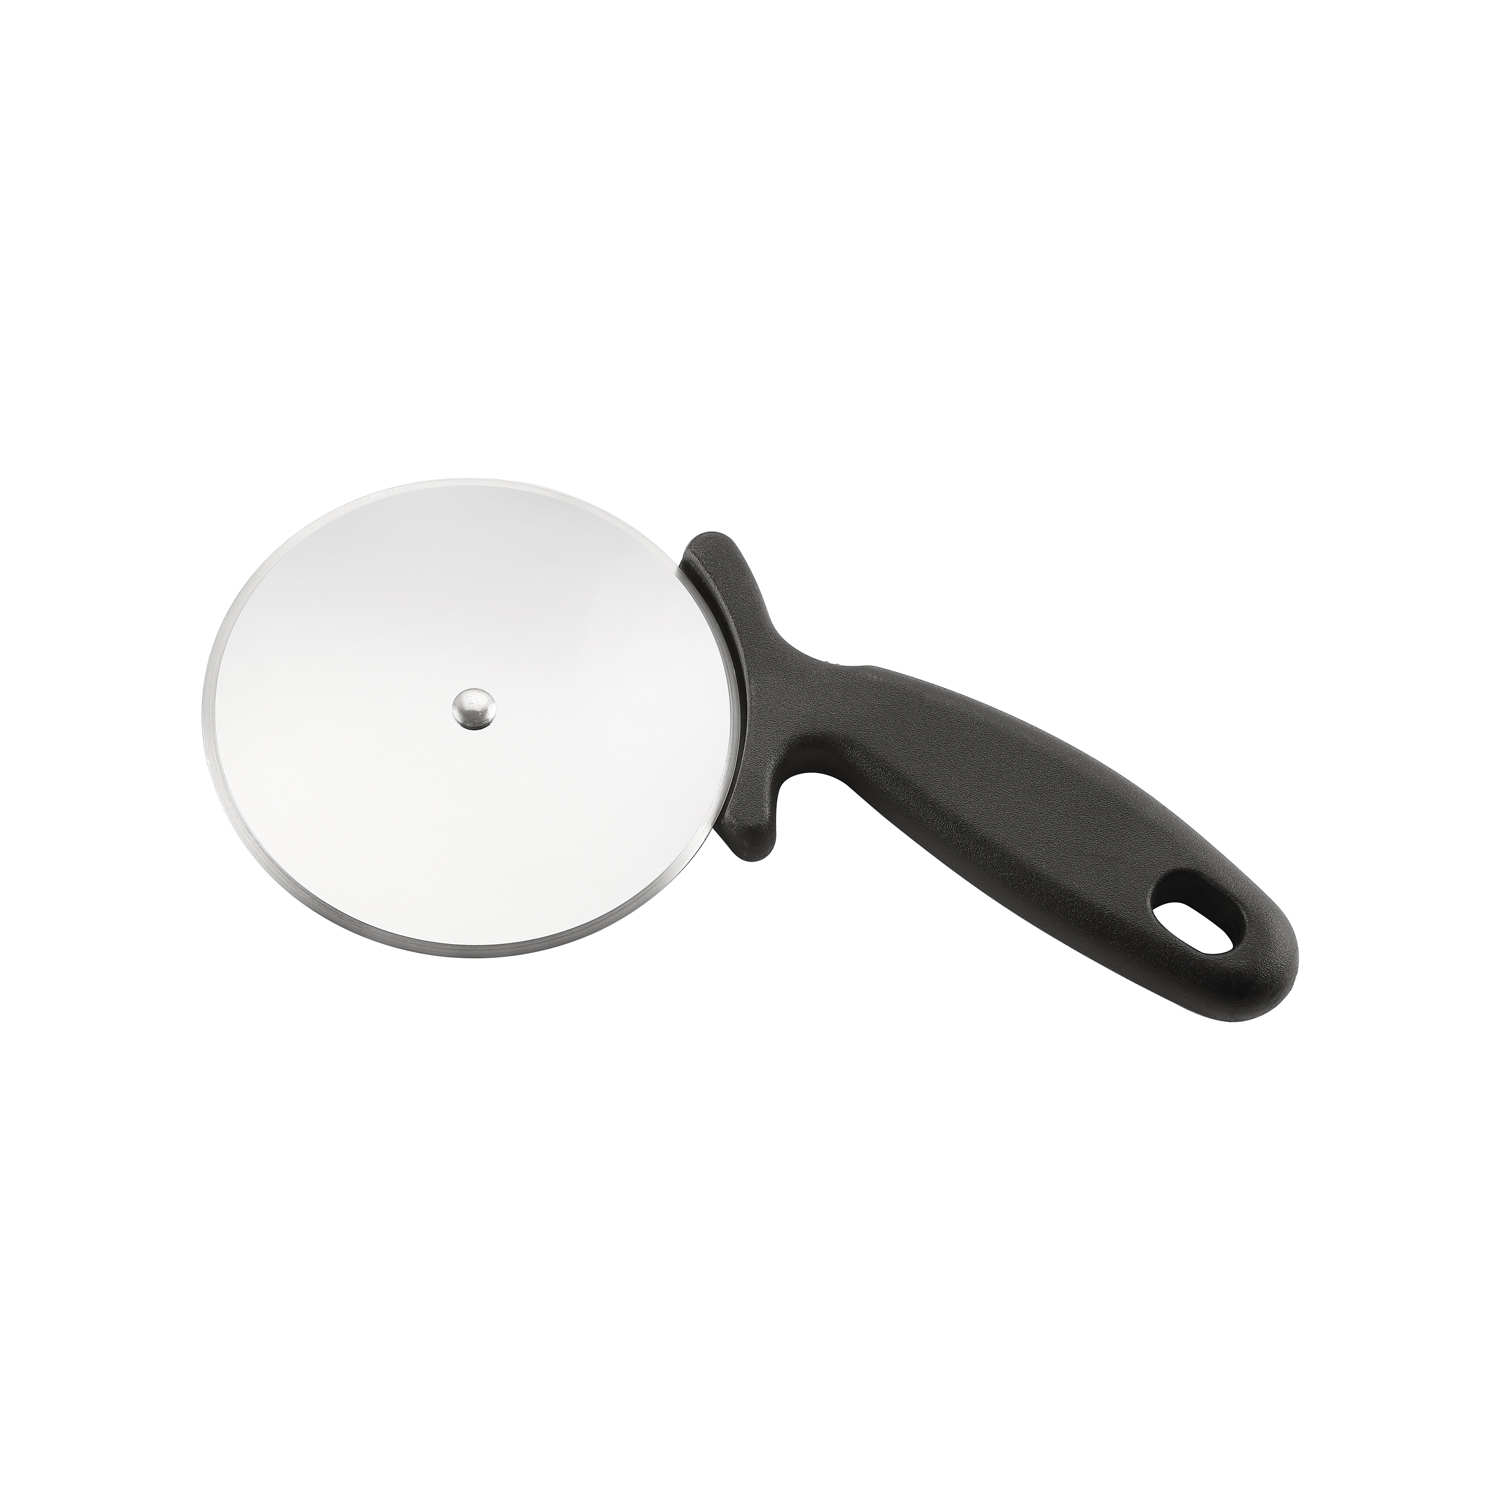 CAC China B15PZ-4K Pizza Cutter with Black Handle 4" Dia.